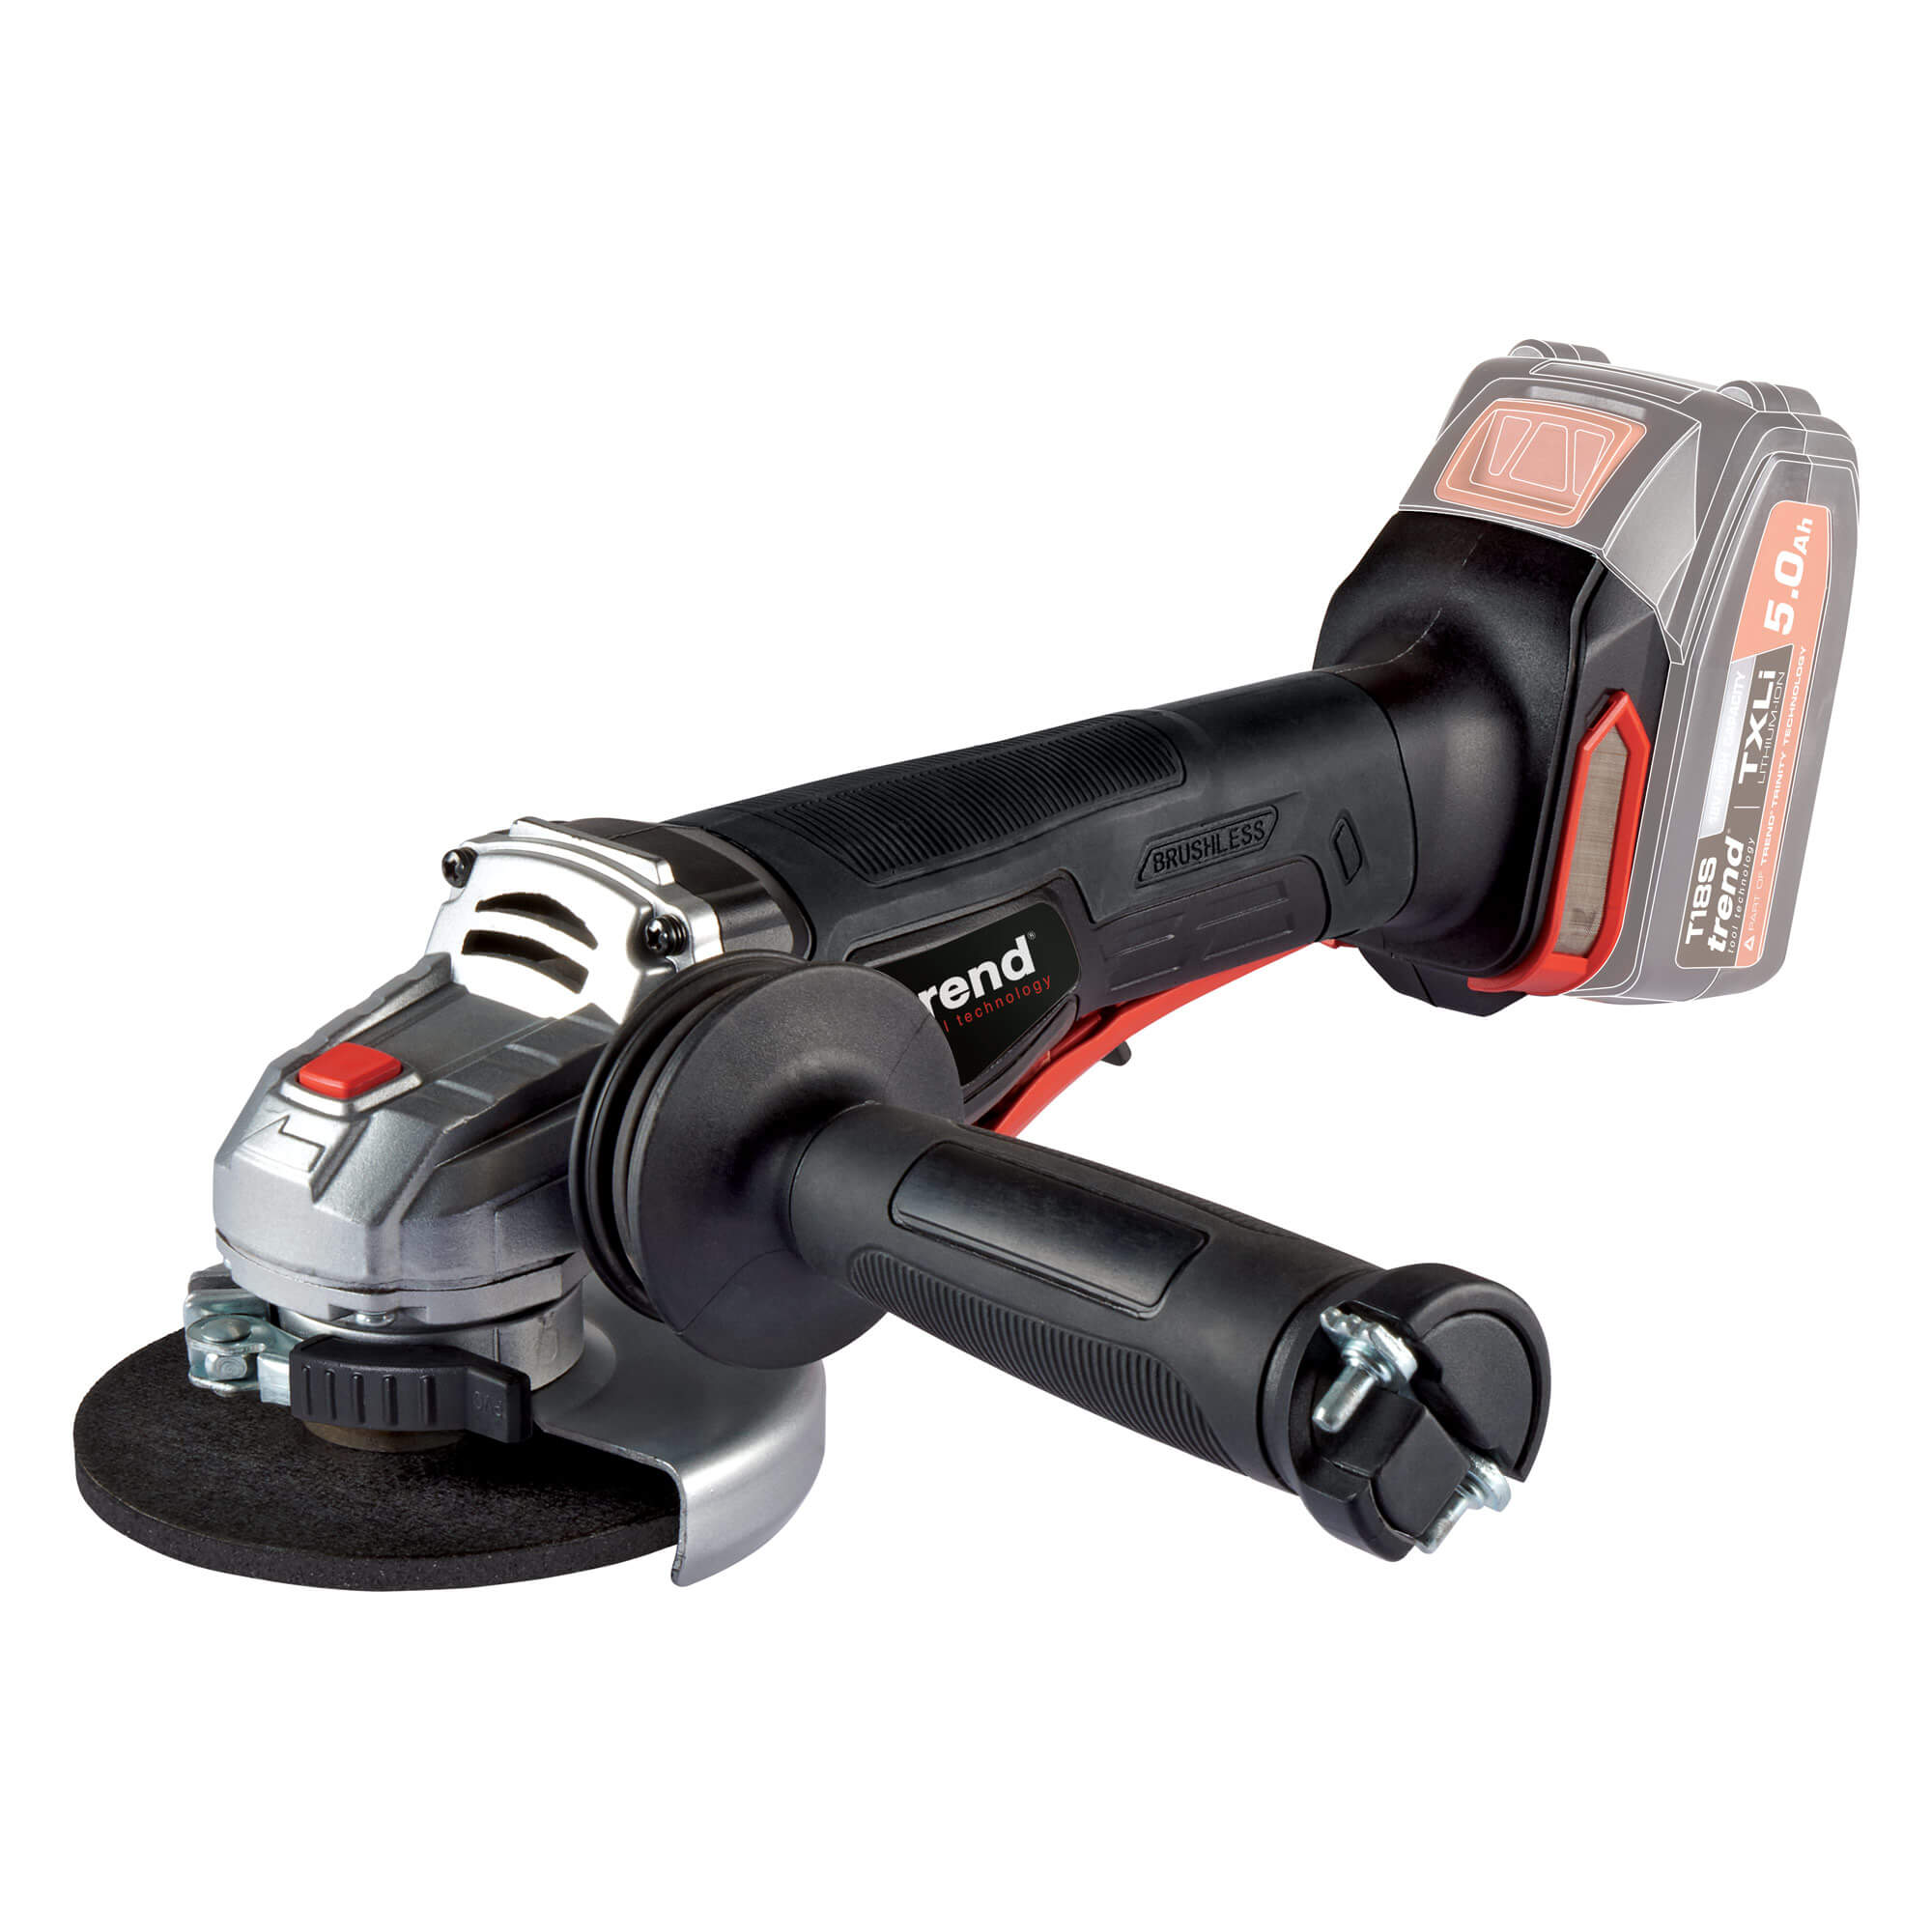 Trend T18S/AG115 18v Cordless Brushless Angle Grinder 115mm No Batteries No Charger No Case